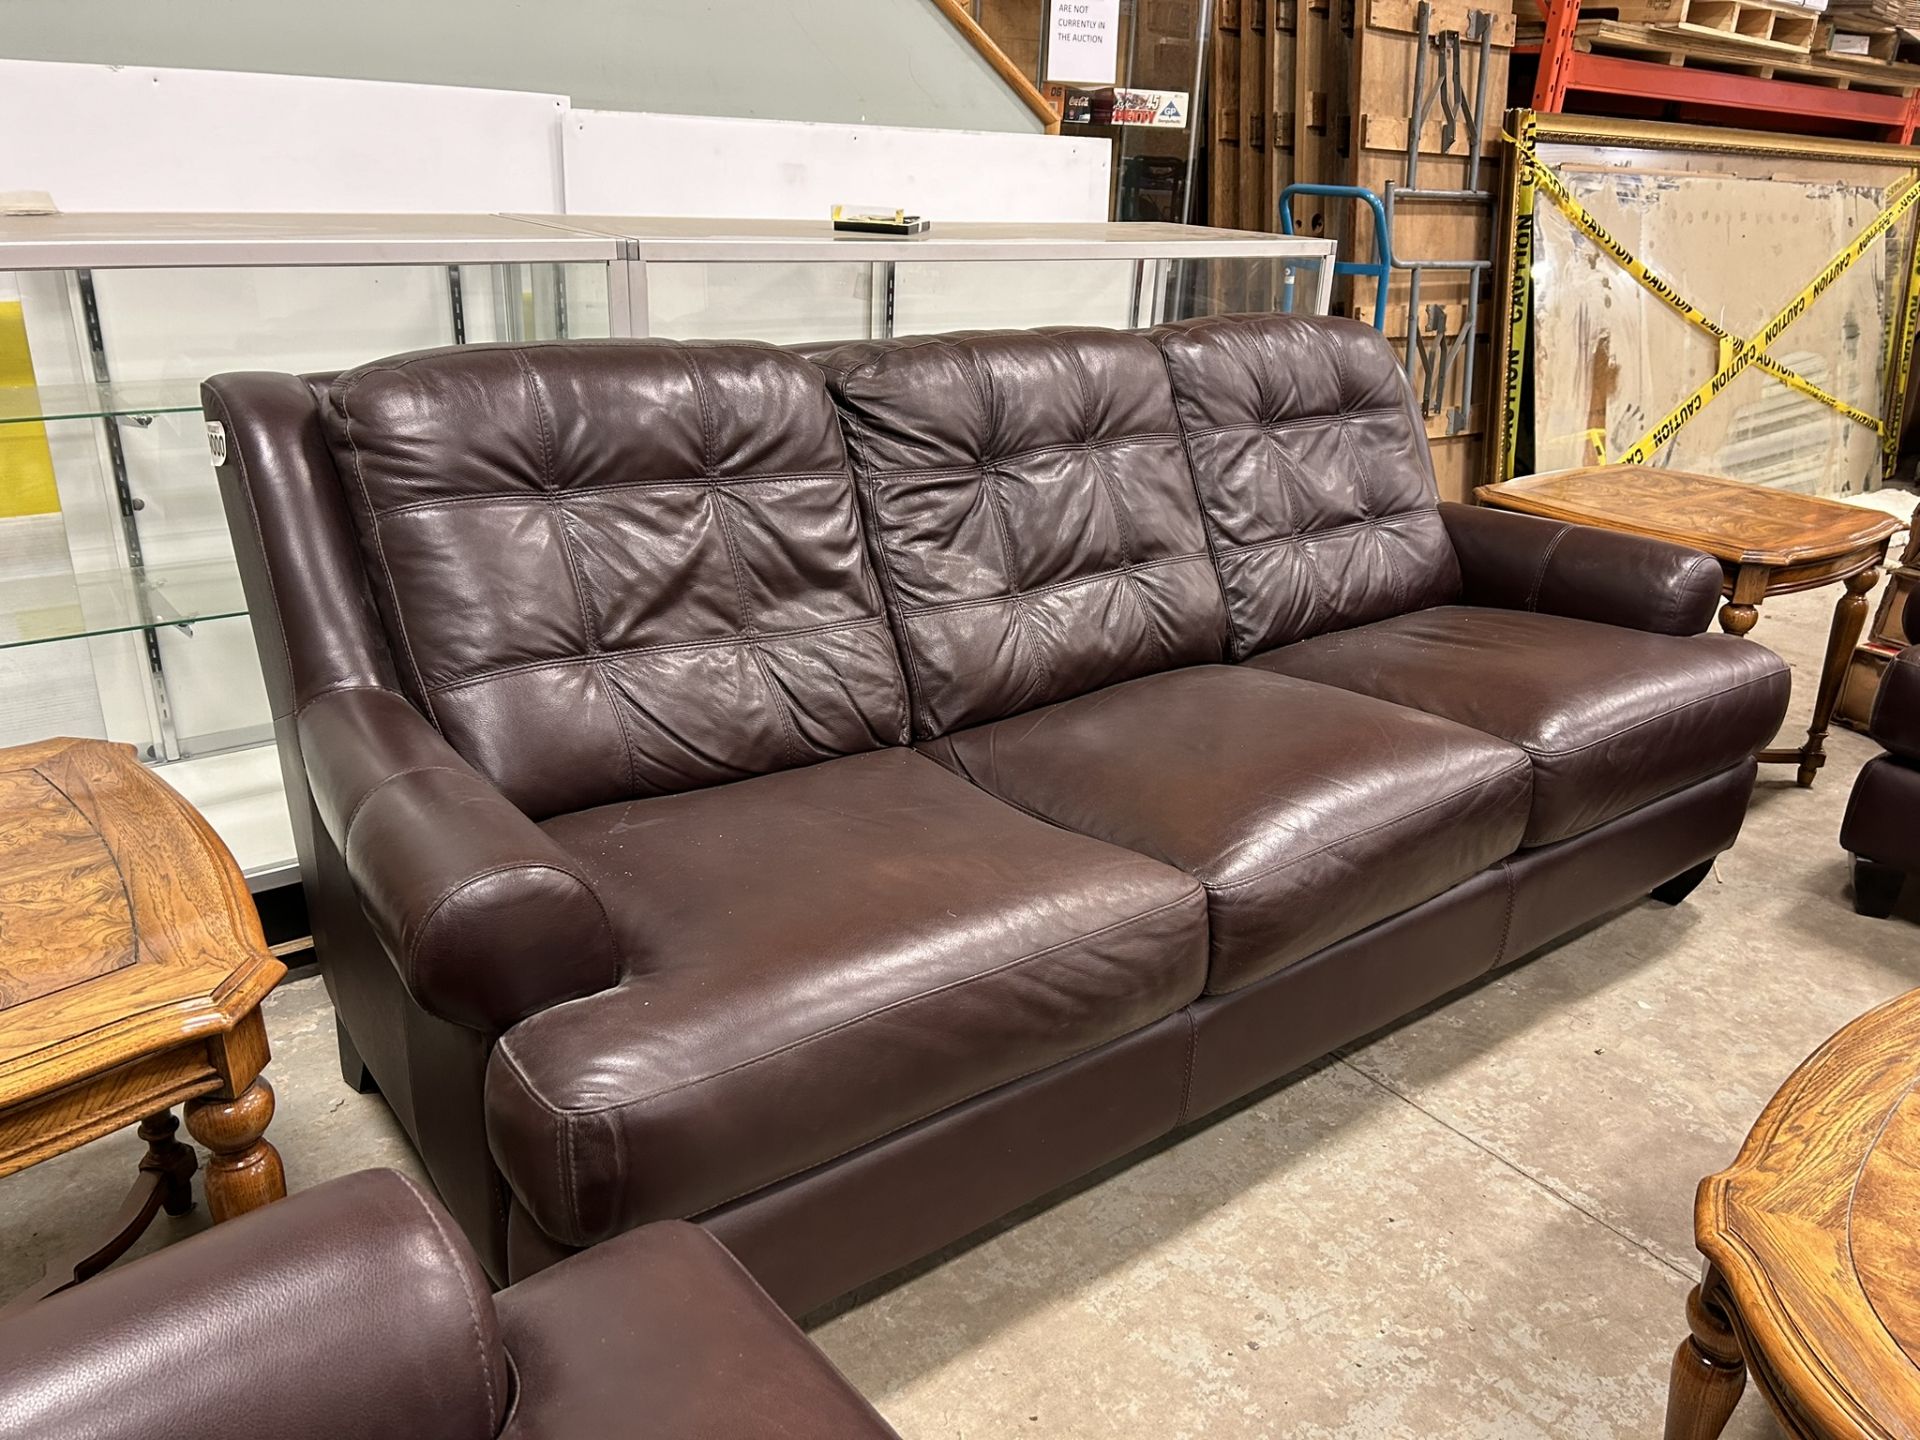 3 PC EXECUTIVE BROWN LEATHER SOFA, LOVESEAT & CHAIR (COFFEE & END TABLES NOT INCLUDED) - Image 6 of 8